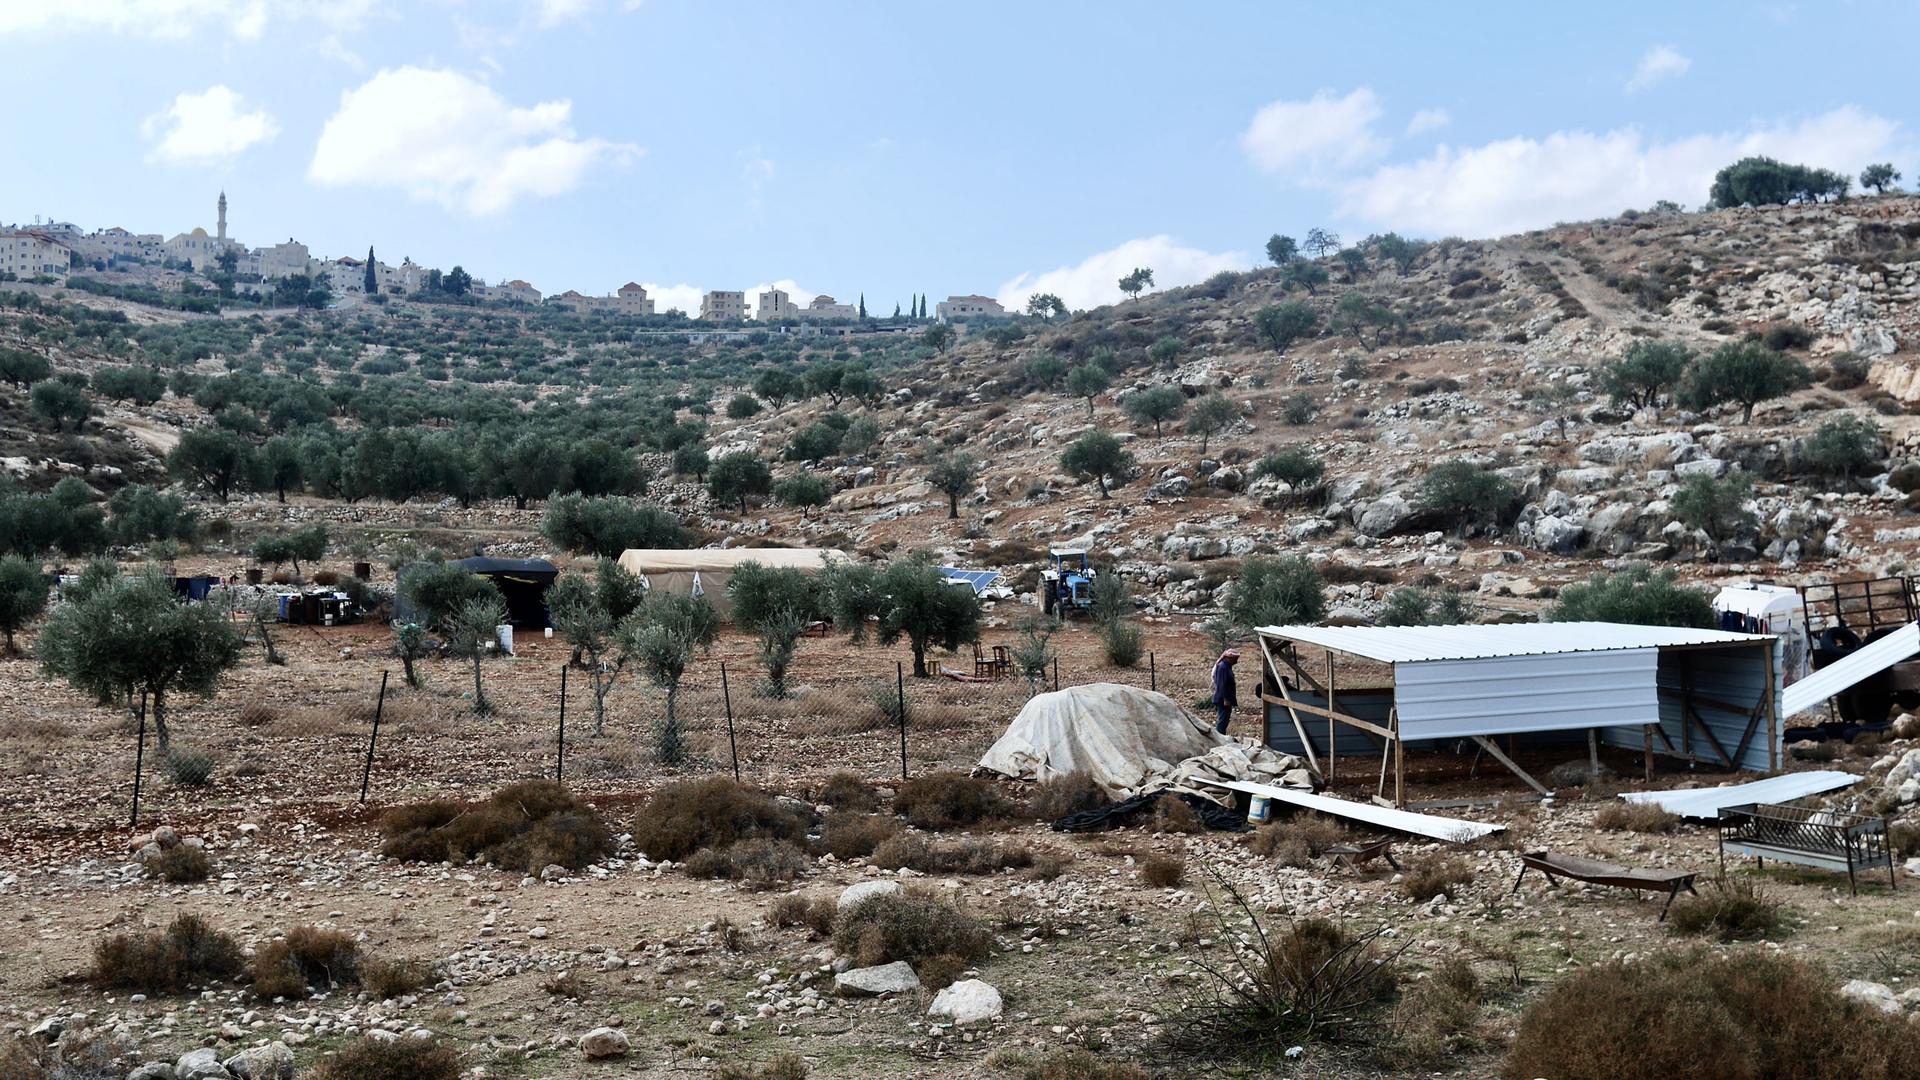 For more than 30 years, Palestinian and Bedouin shepherds say they lived peacefully in part of the Israeli-occupied West Bank. 